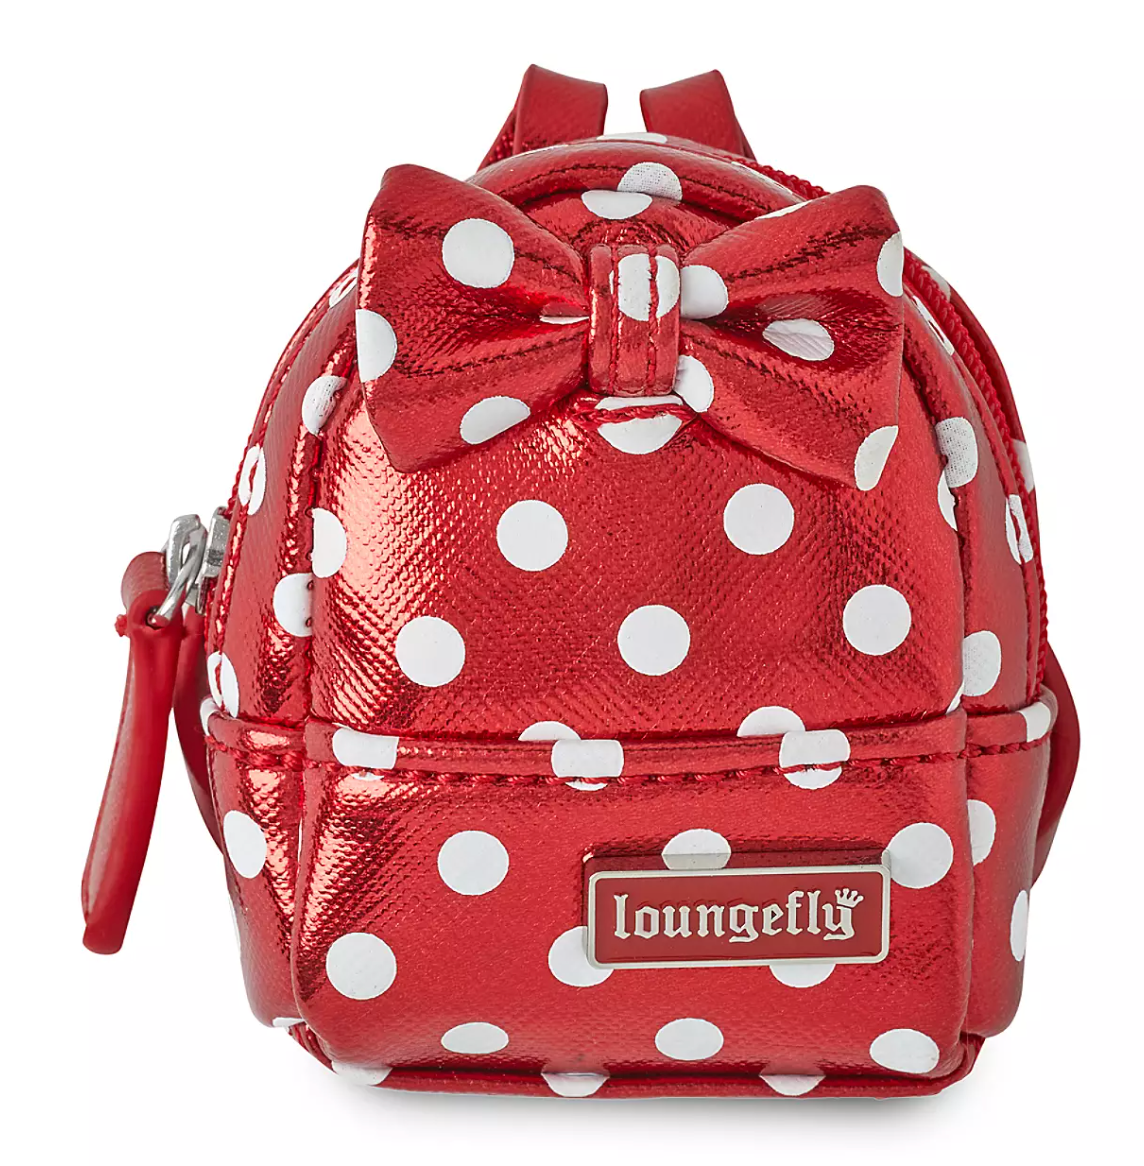 Disney Nuimos Collection Polka Dot Backpack New With Tag - image 3 of 3